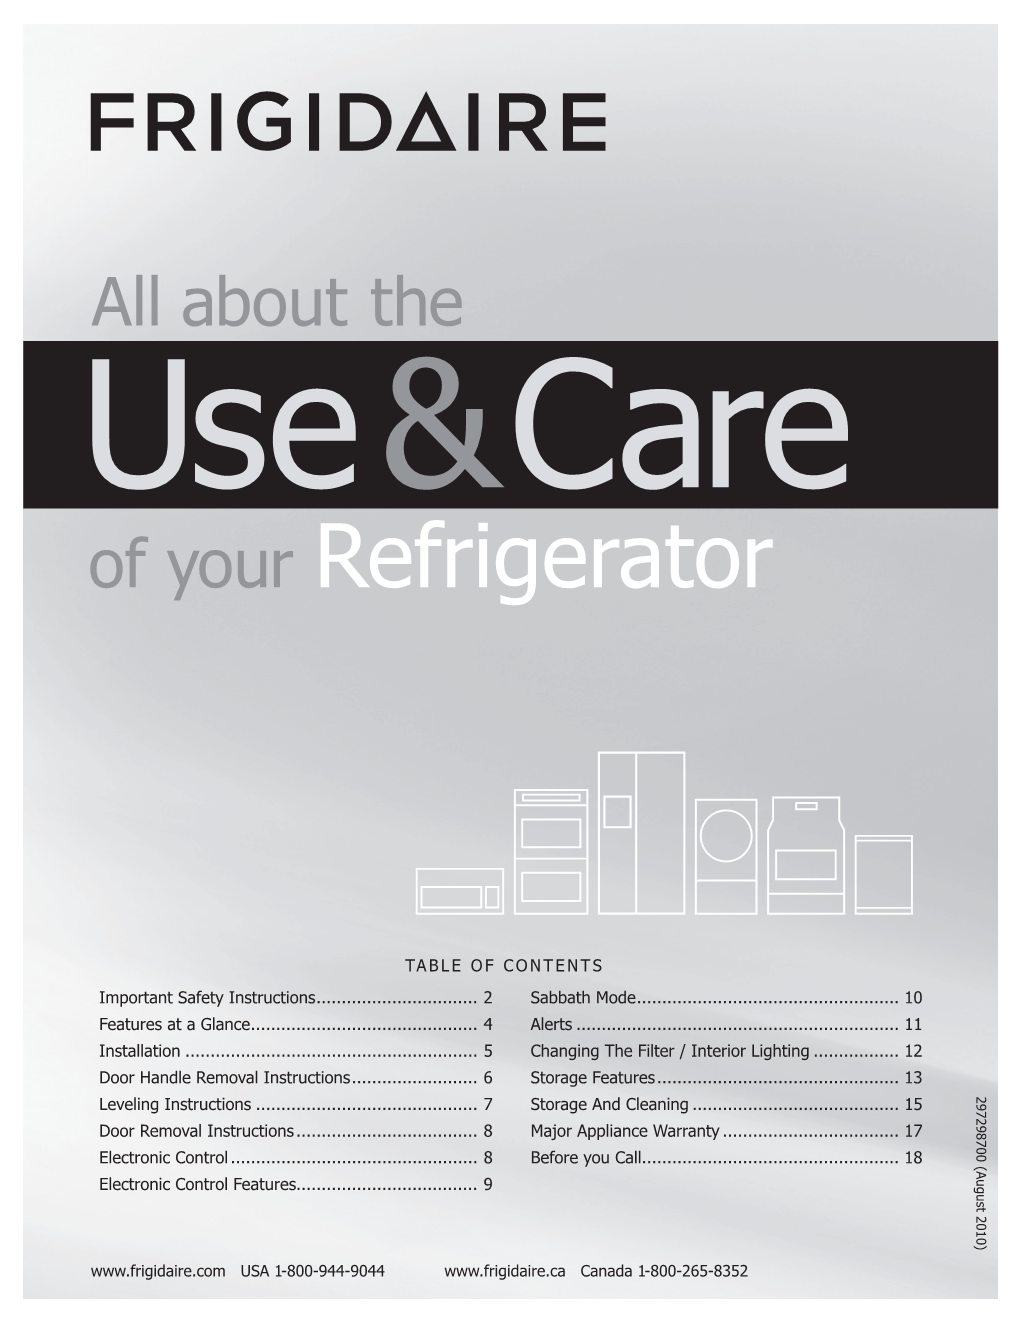 Frigidaire Use and Care Refrigerator 9-10-10.Indd